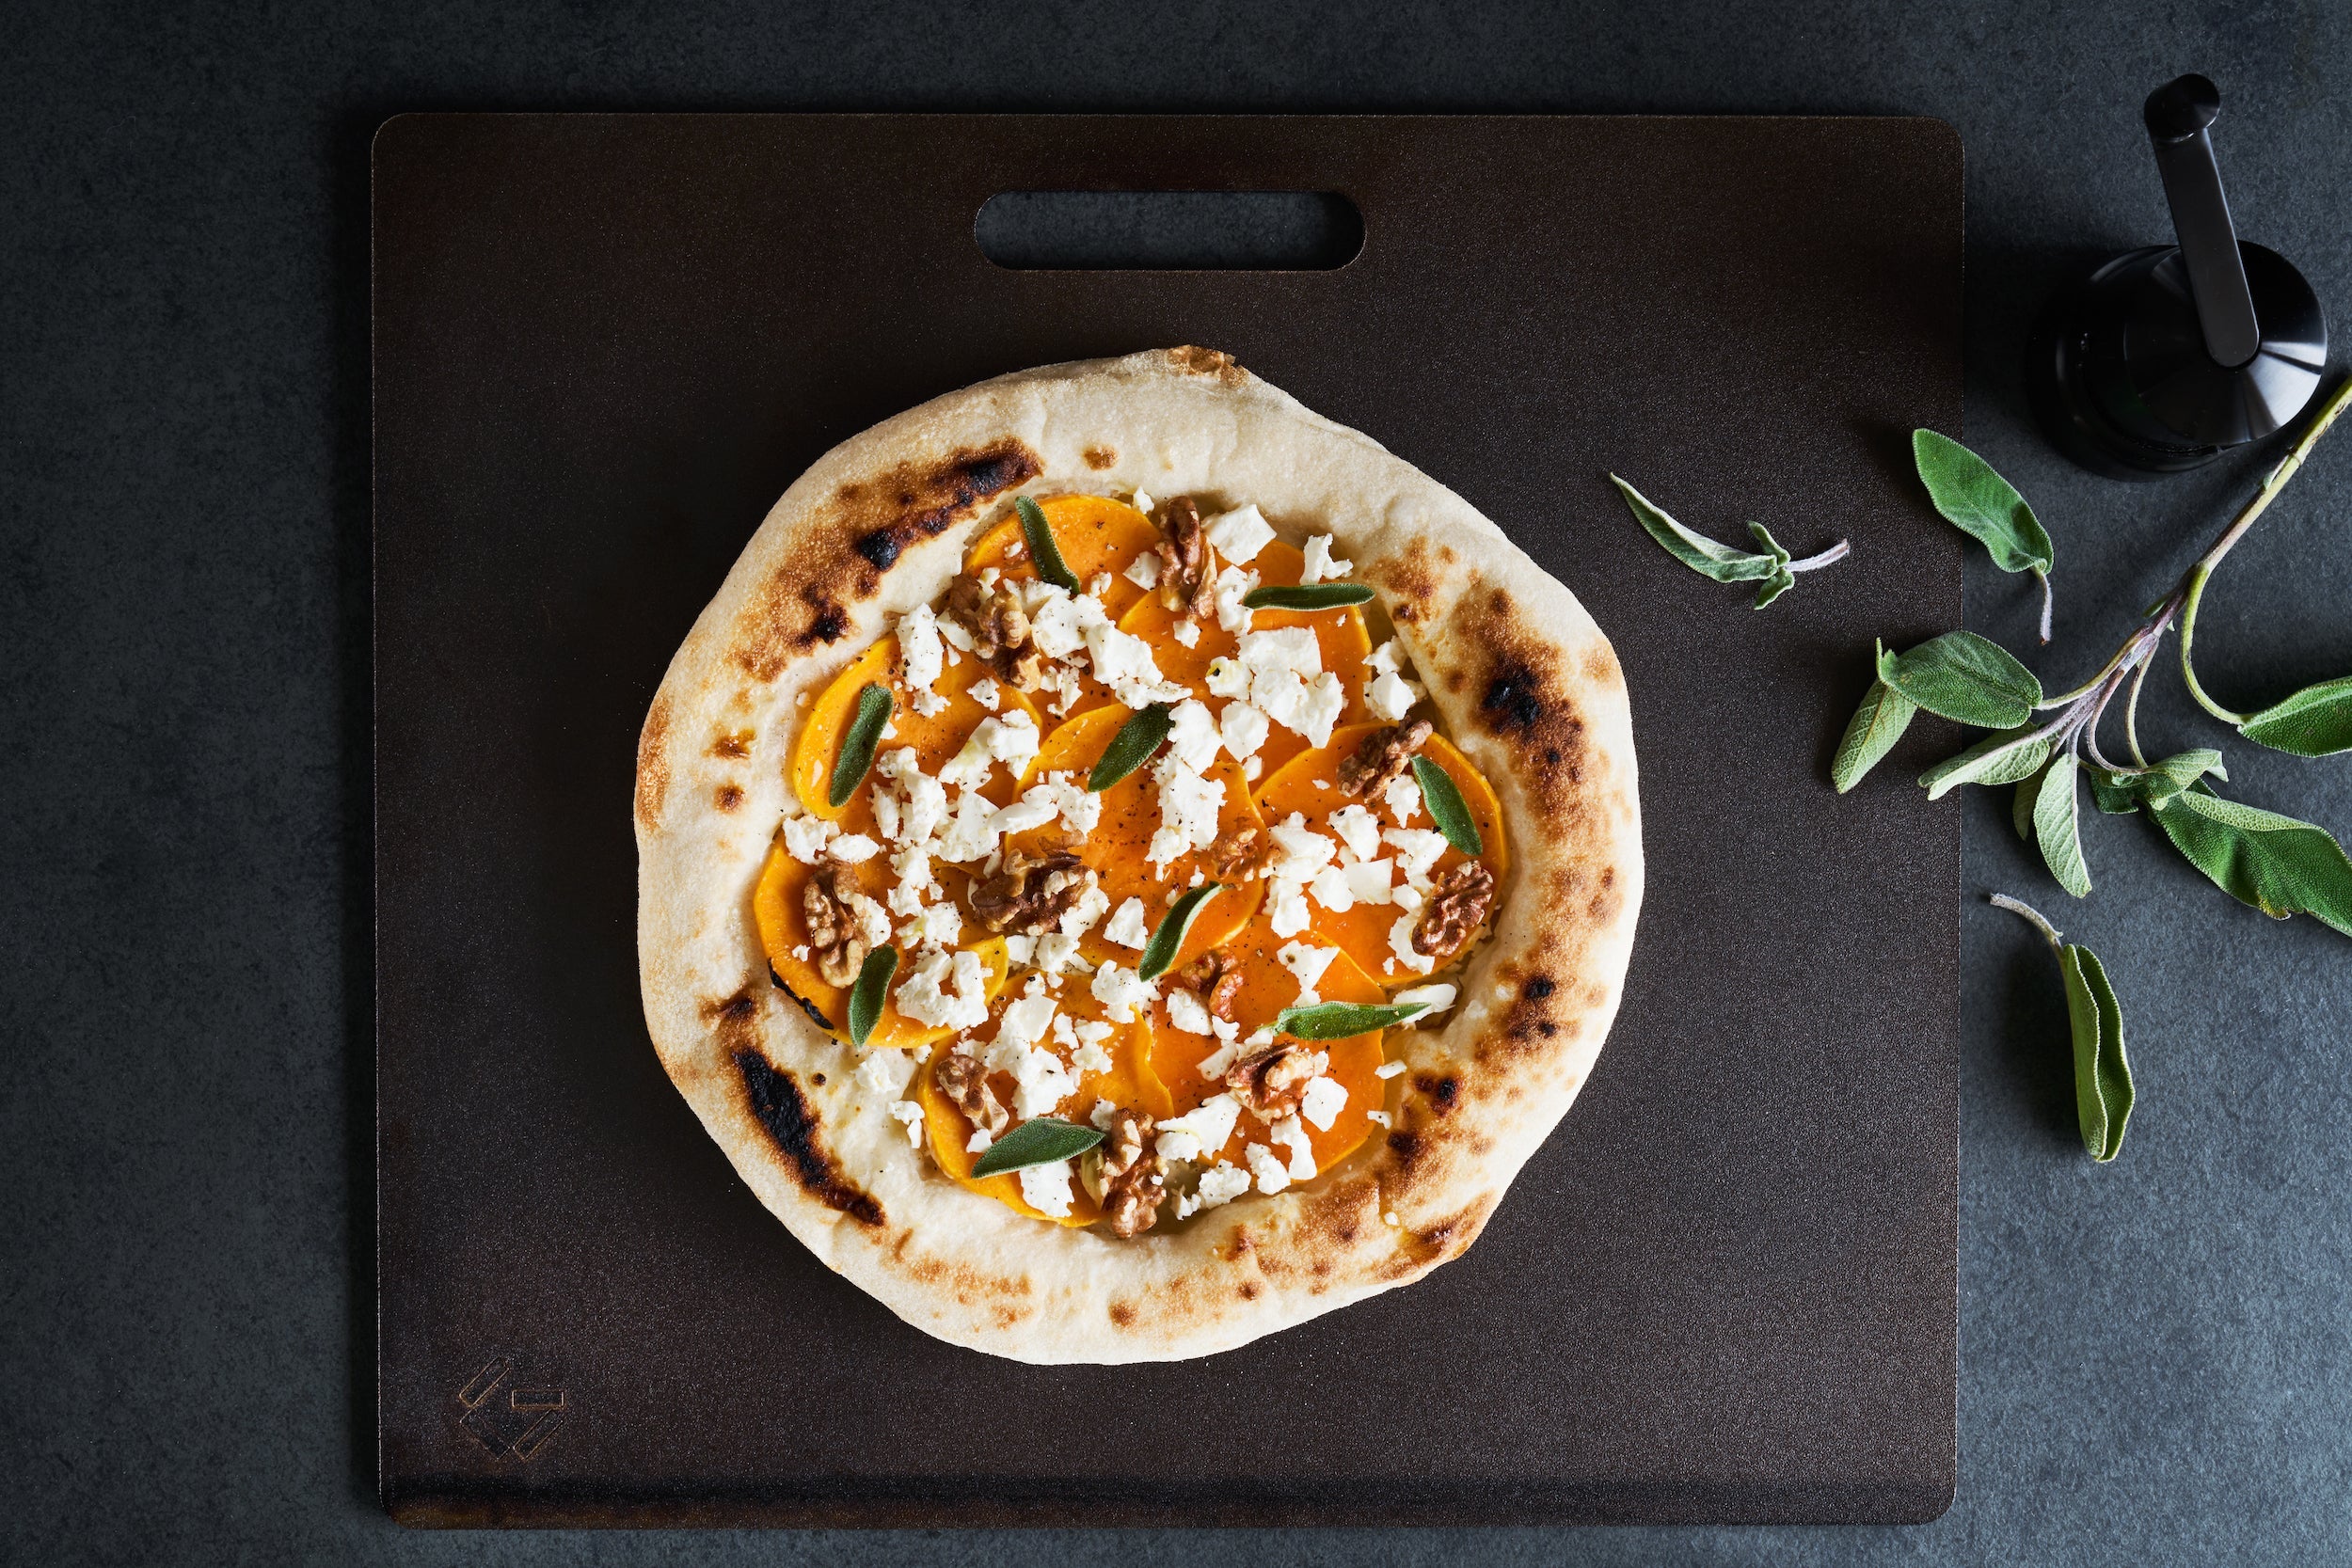 Pizza bianca with butternut squash, feta, and sage